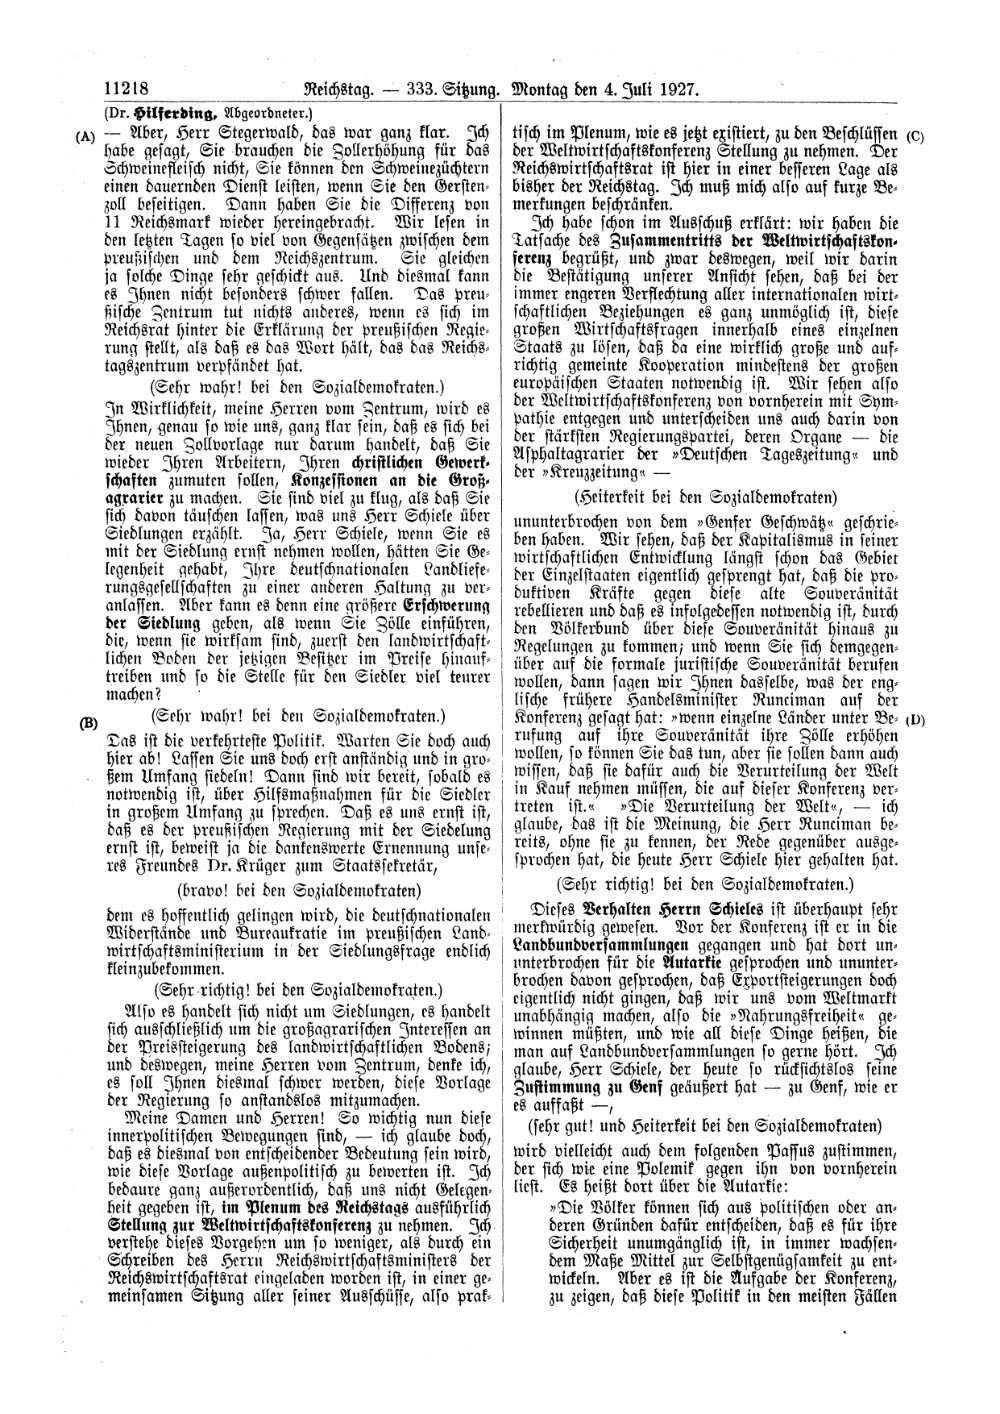 Scan of page 11218